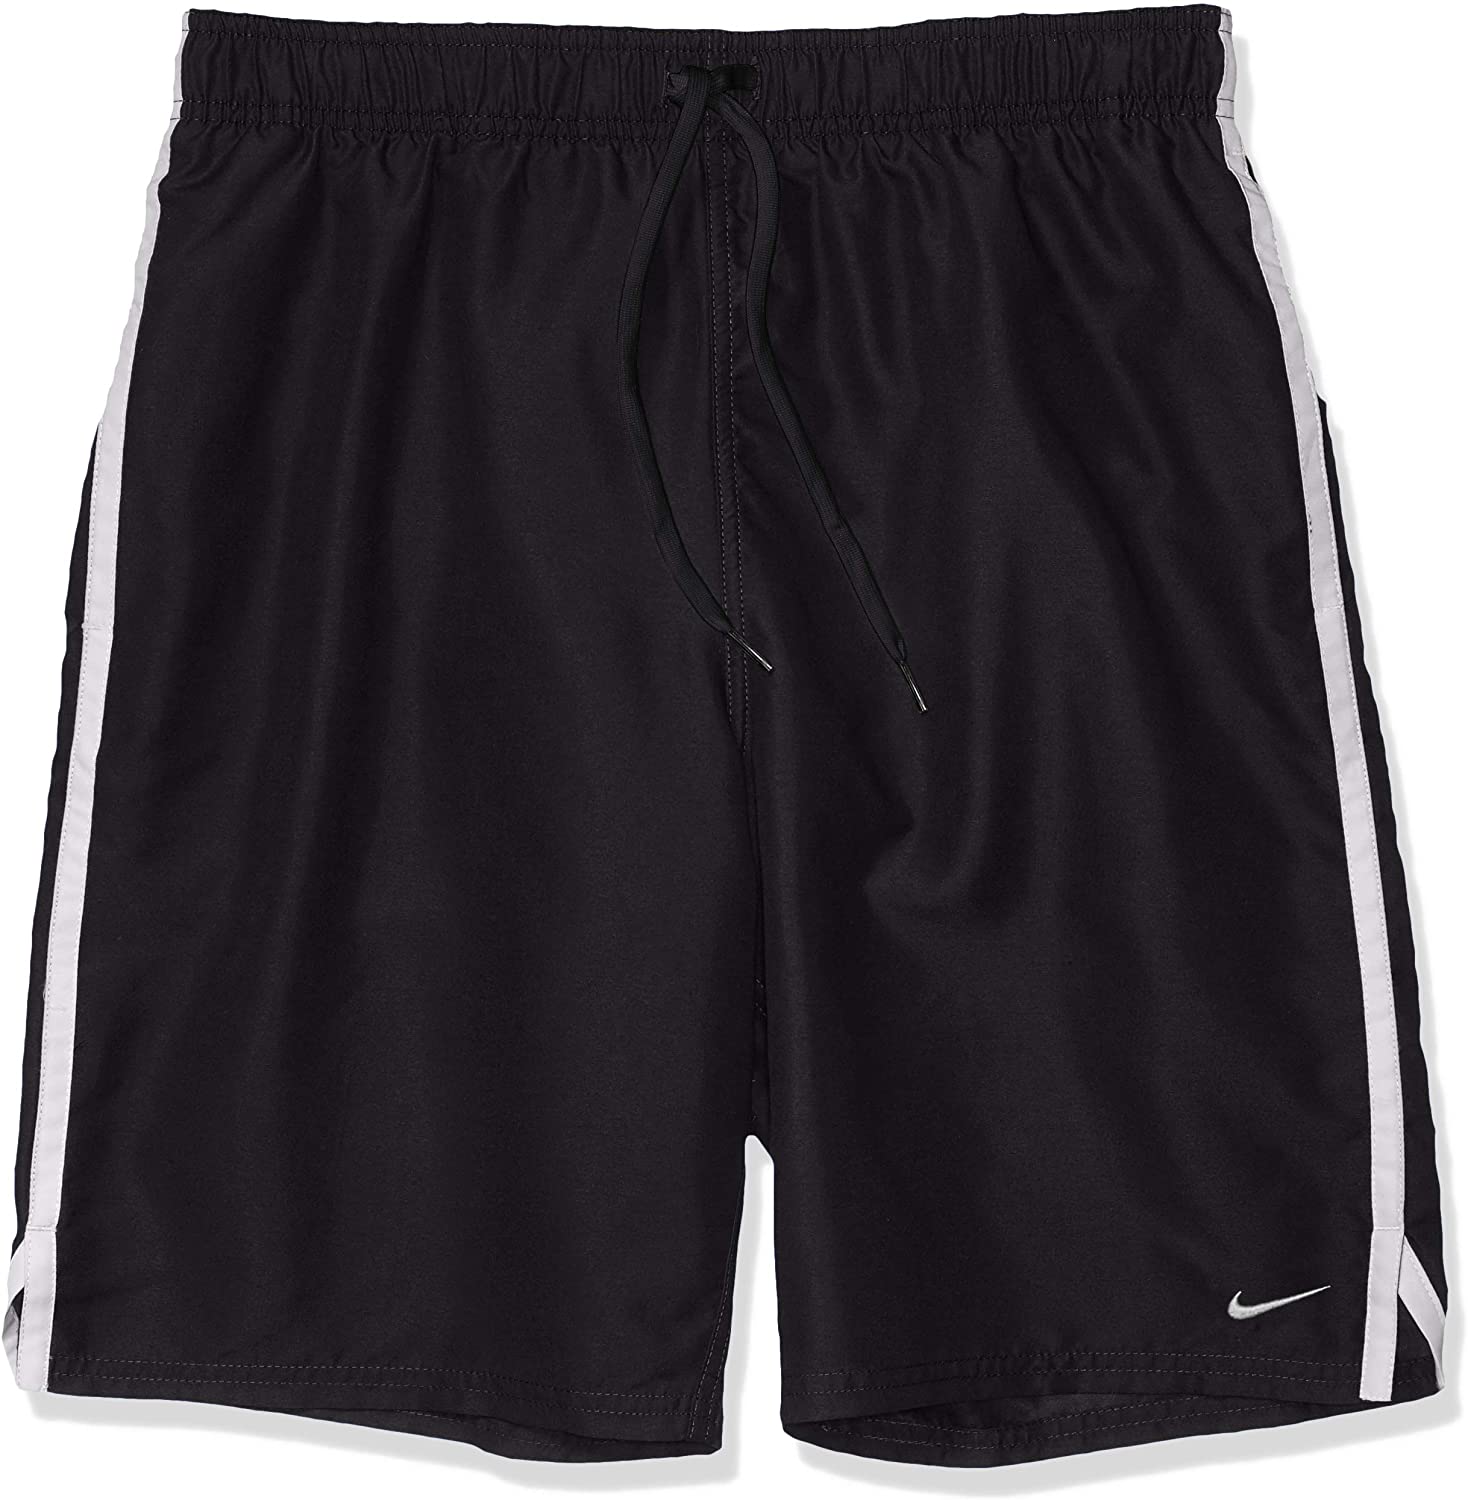 Men's Nike Diverge 9" Volley Short Swim Trunk in Black color from the front